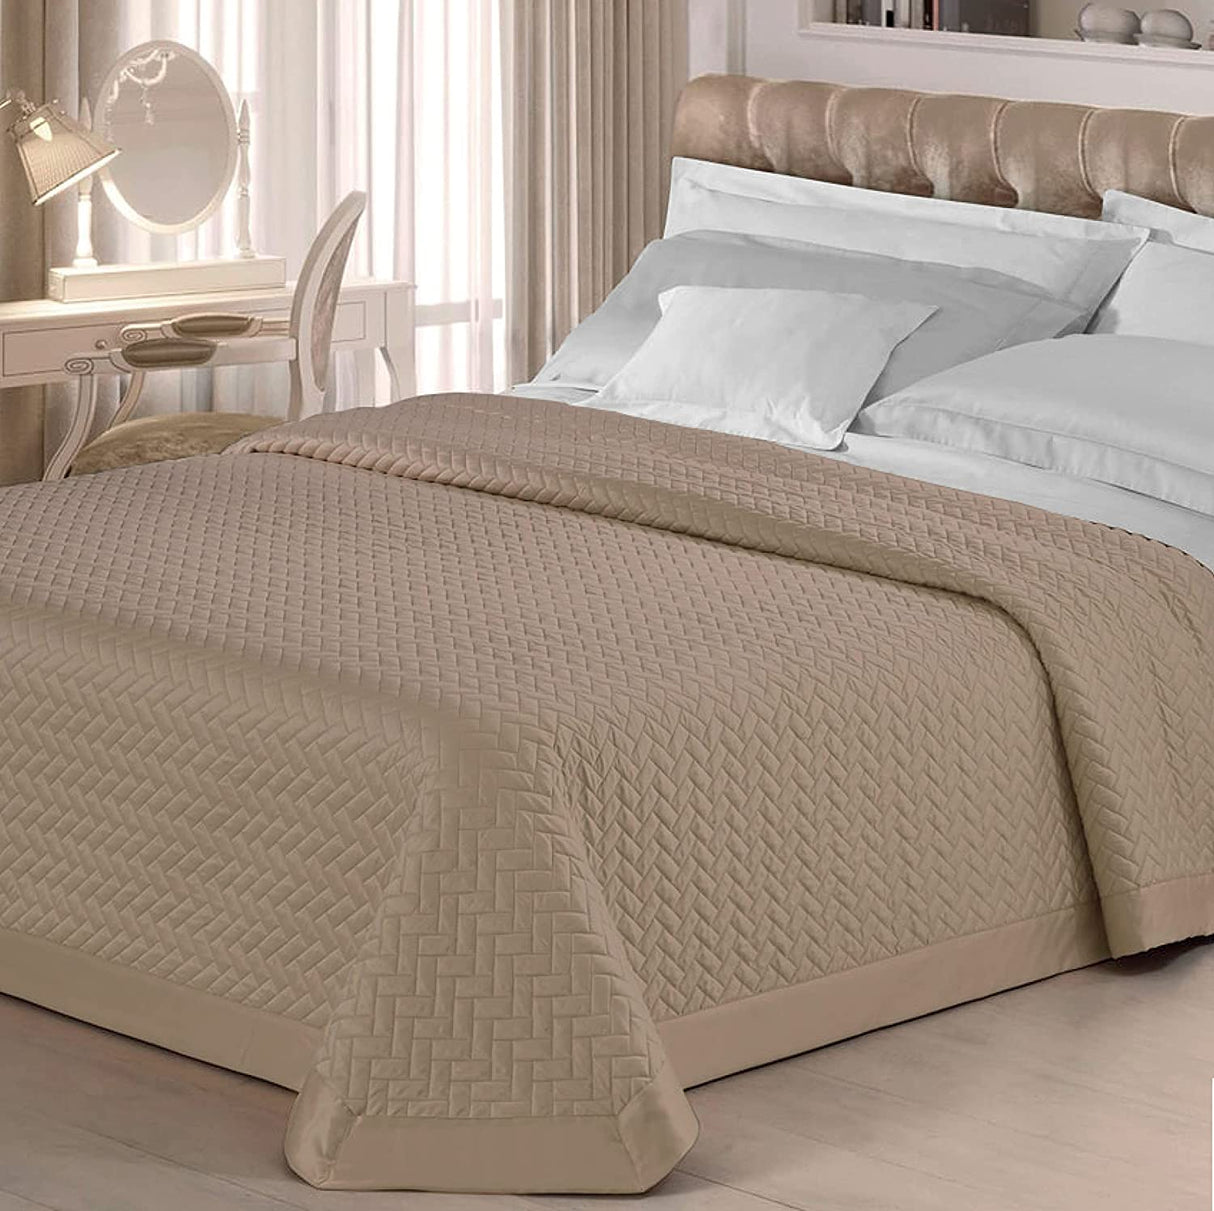 Ruocco Home Lux Double Quilt 260x260 cm